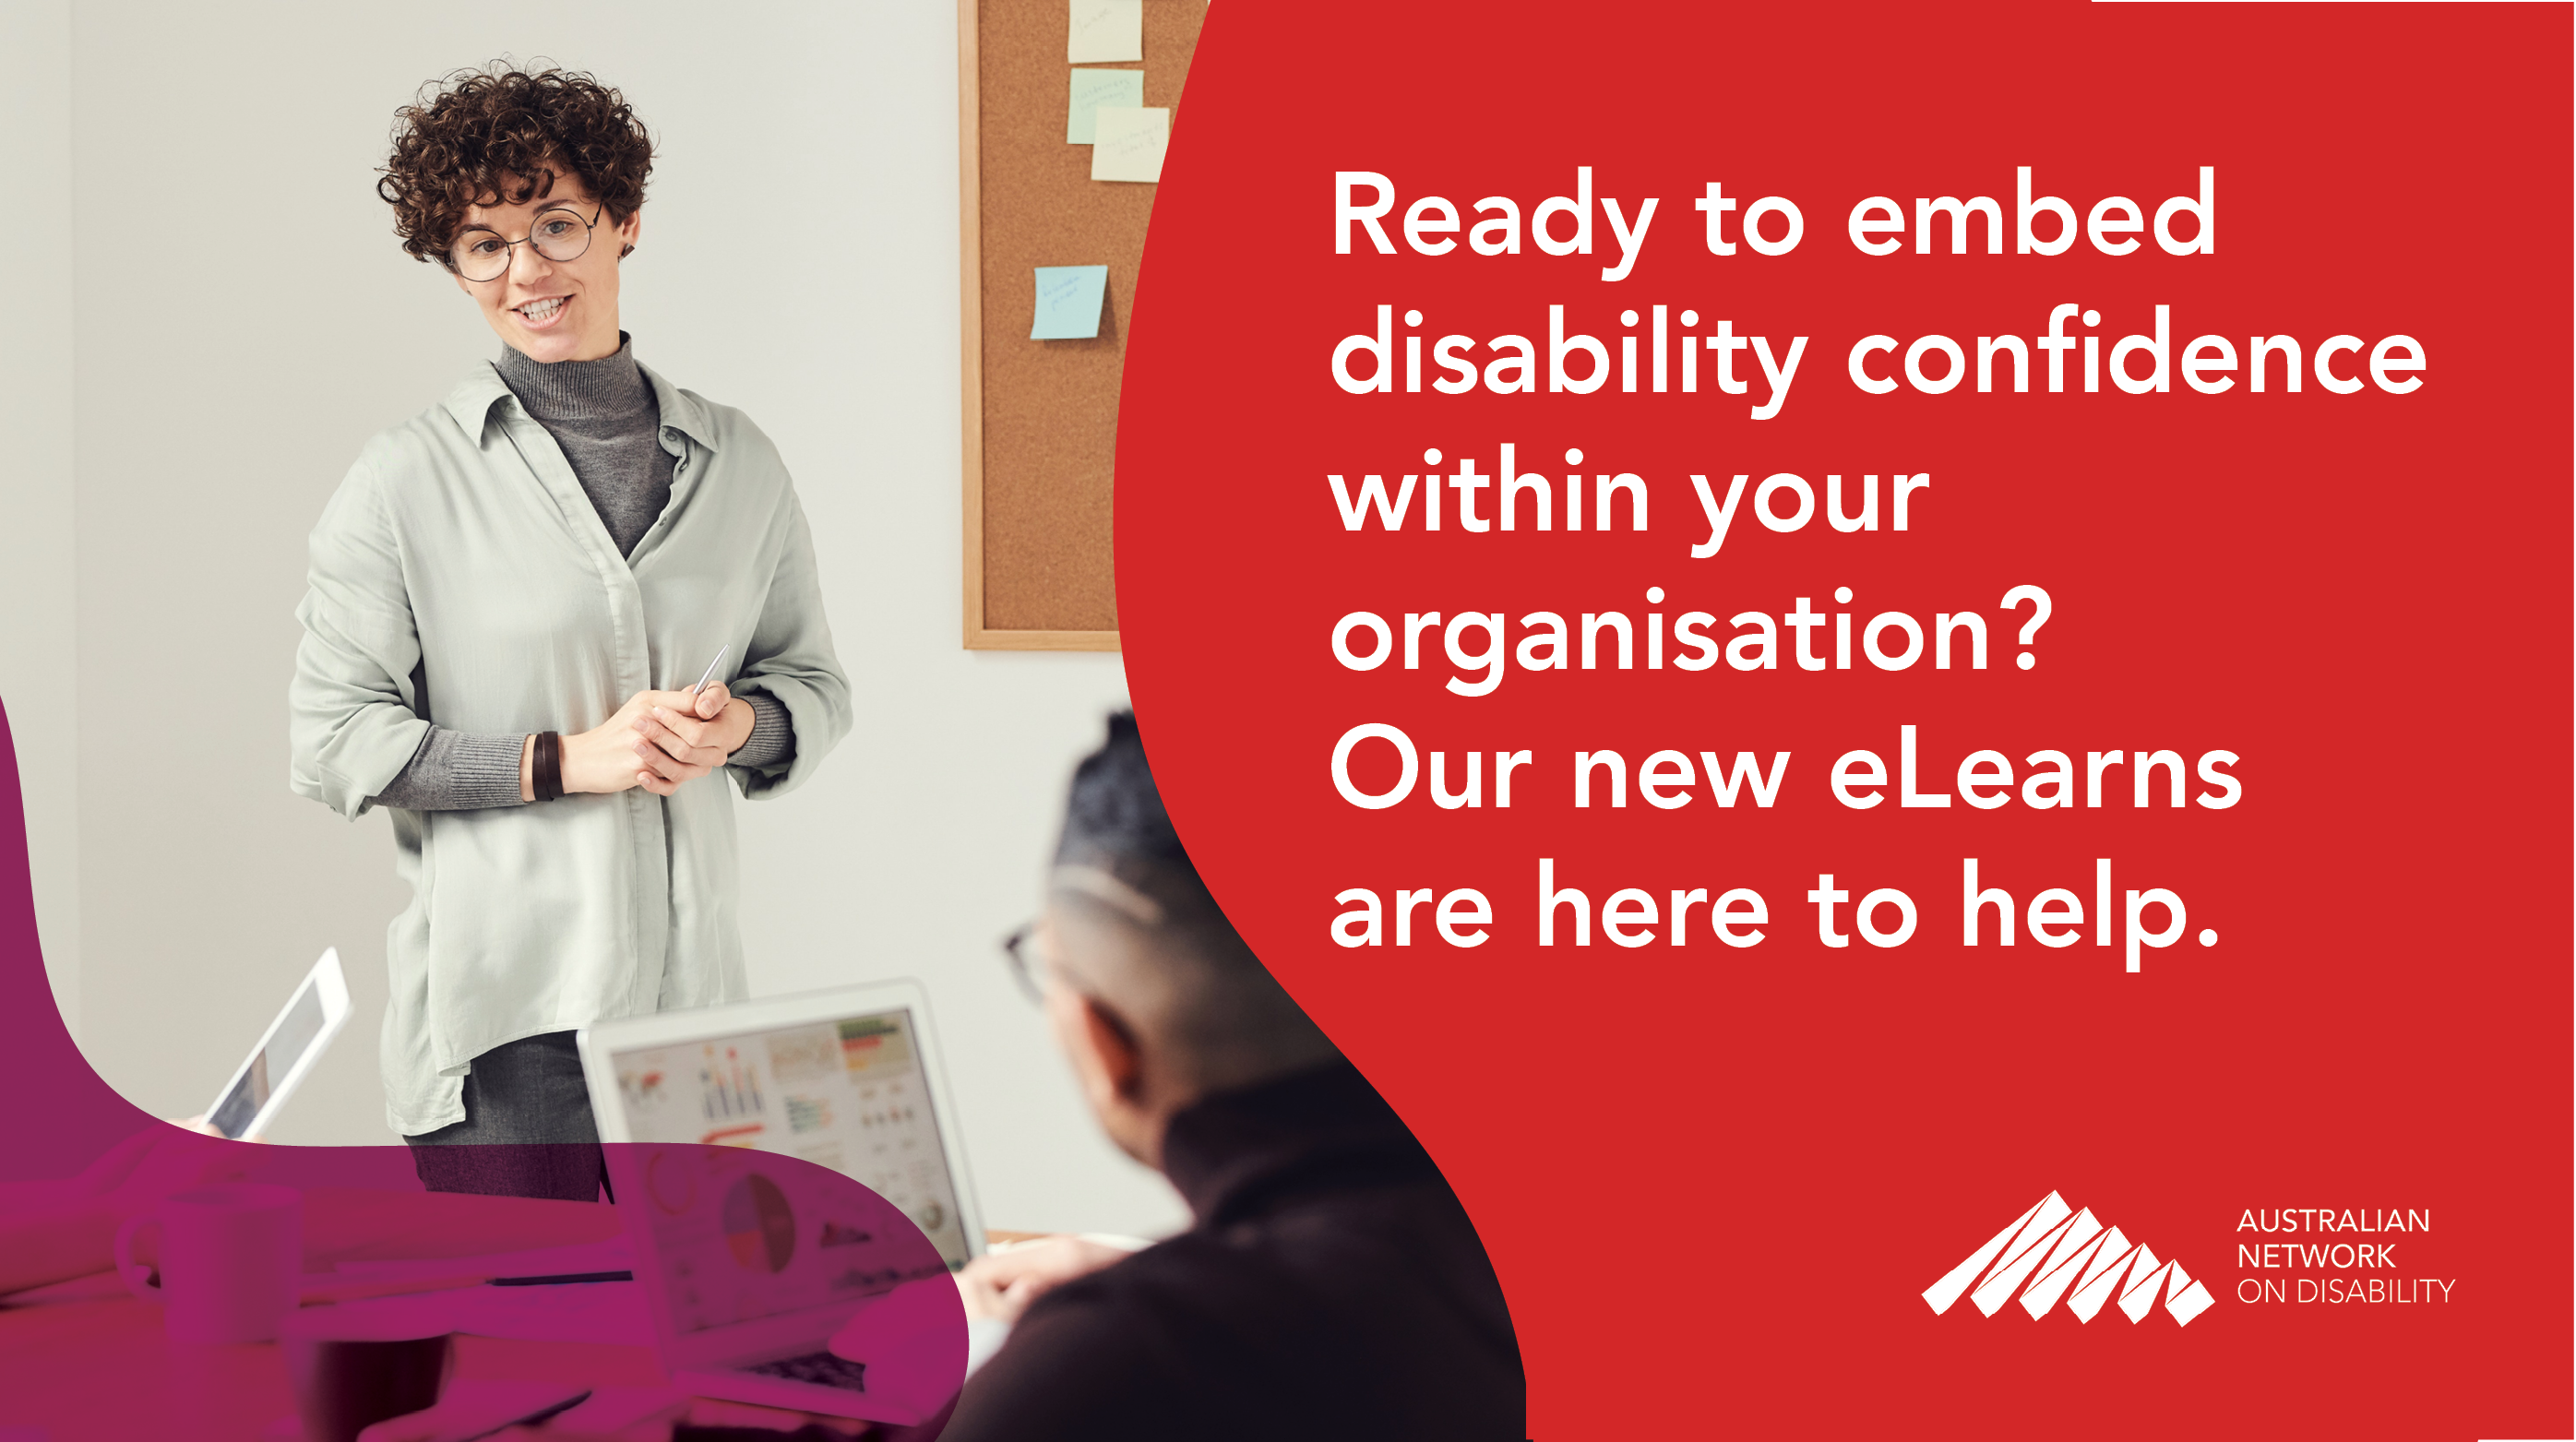 Ready to embed disability confidence within your organisation? Our new eLearns are here to help.